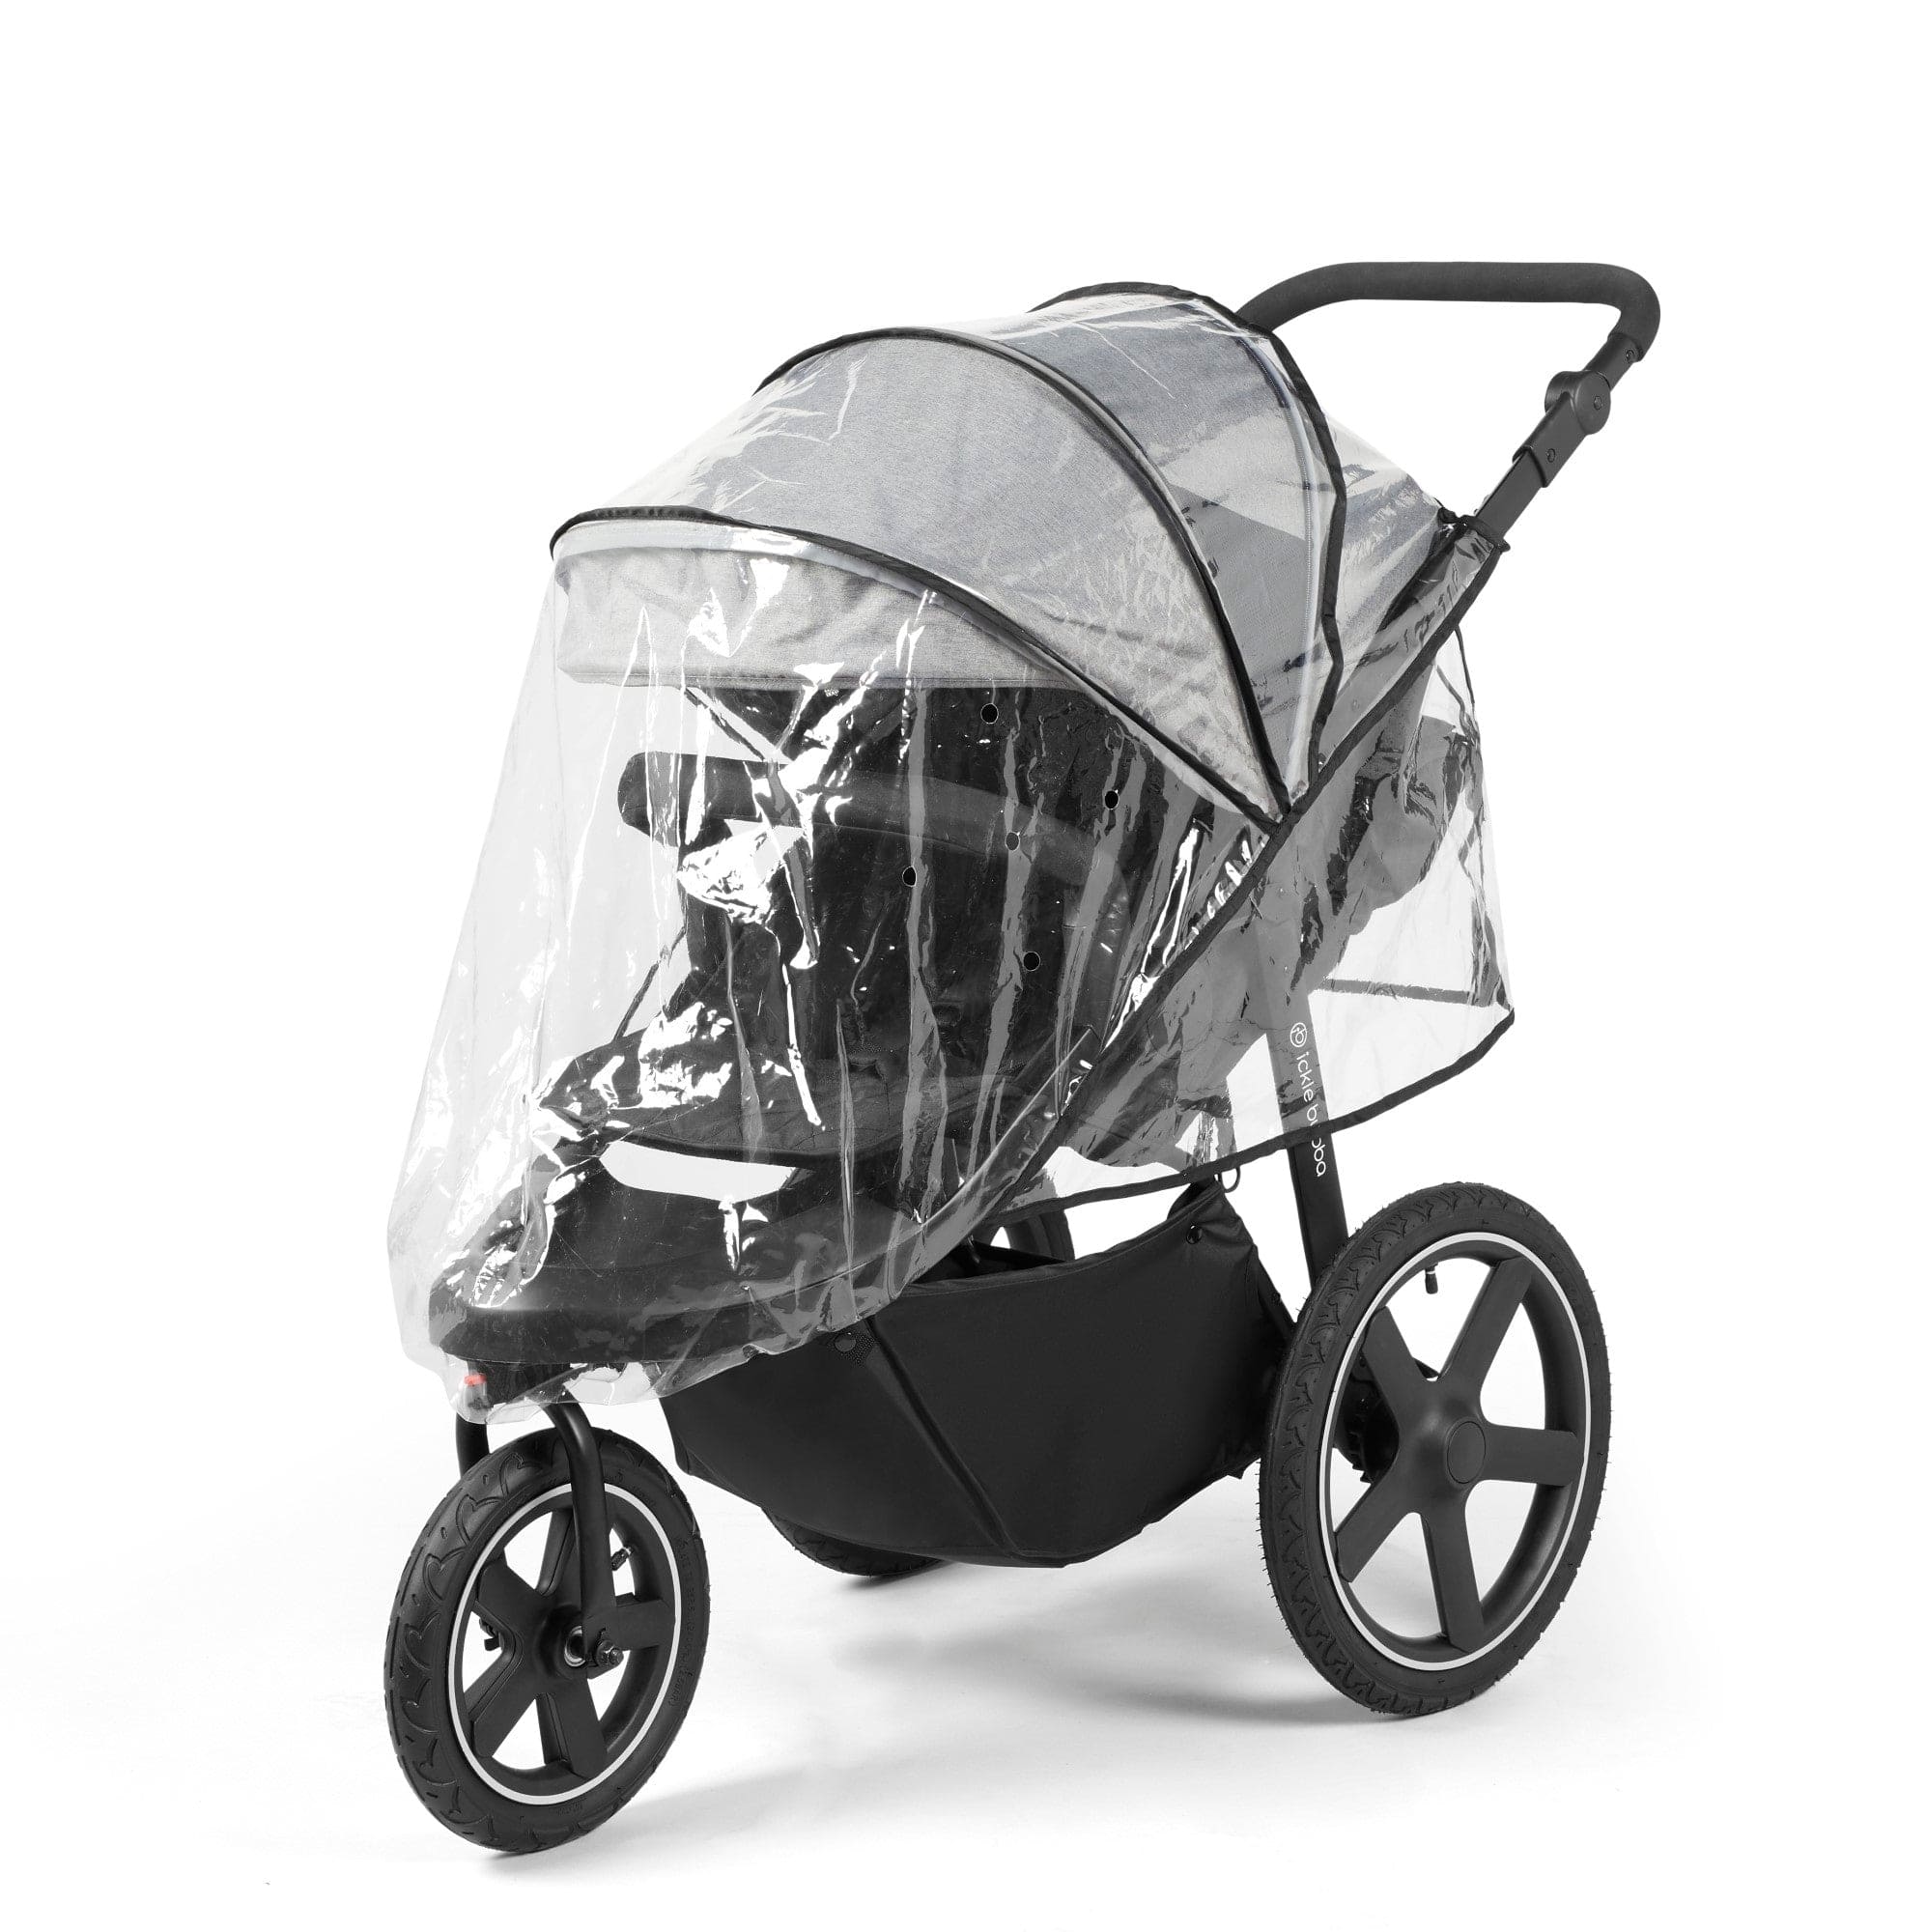 Ickle Bubba 3 wheel pushchairs Ickle Bubba Venus Max Jogger Stroller I-Size Travel System - Black/Space Grey with Isofix Base 13-004-500-014